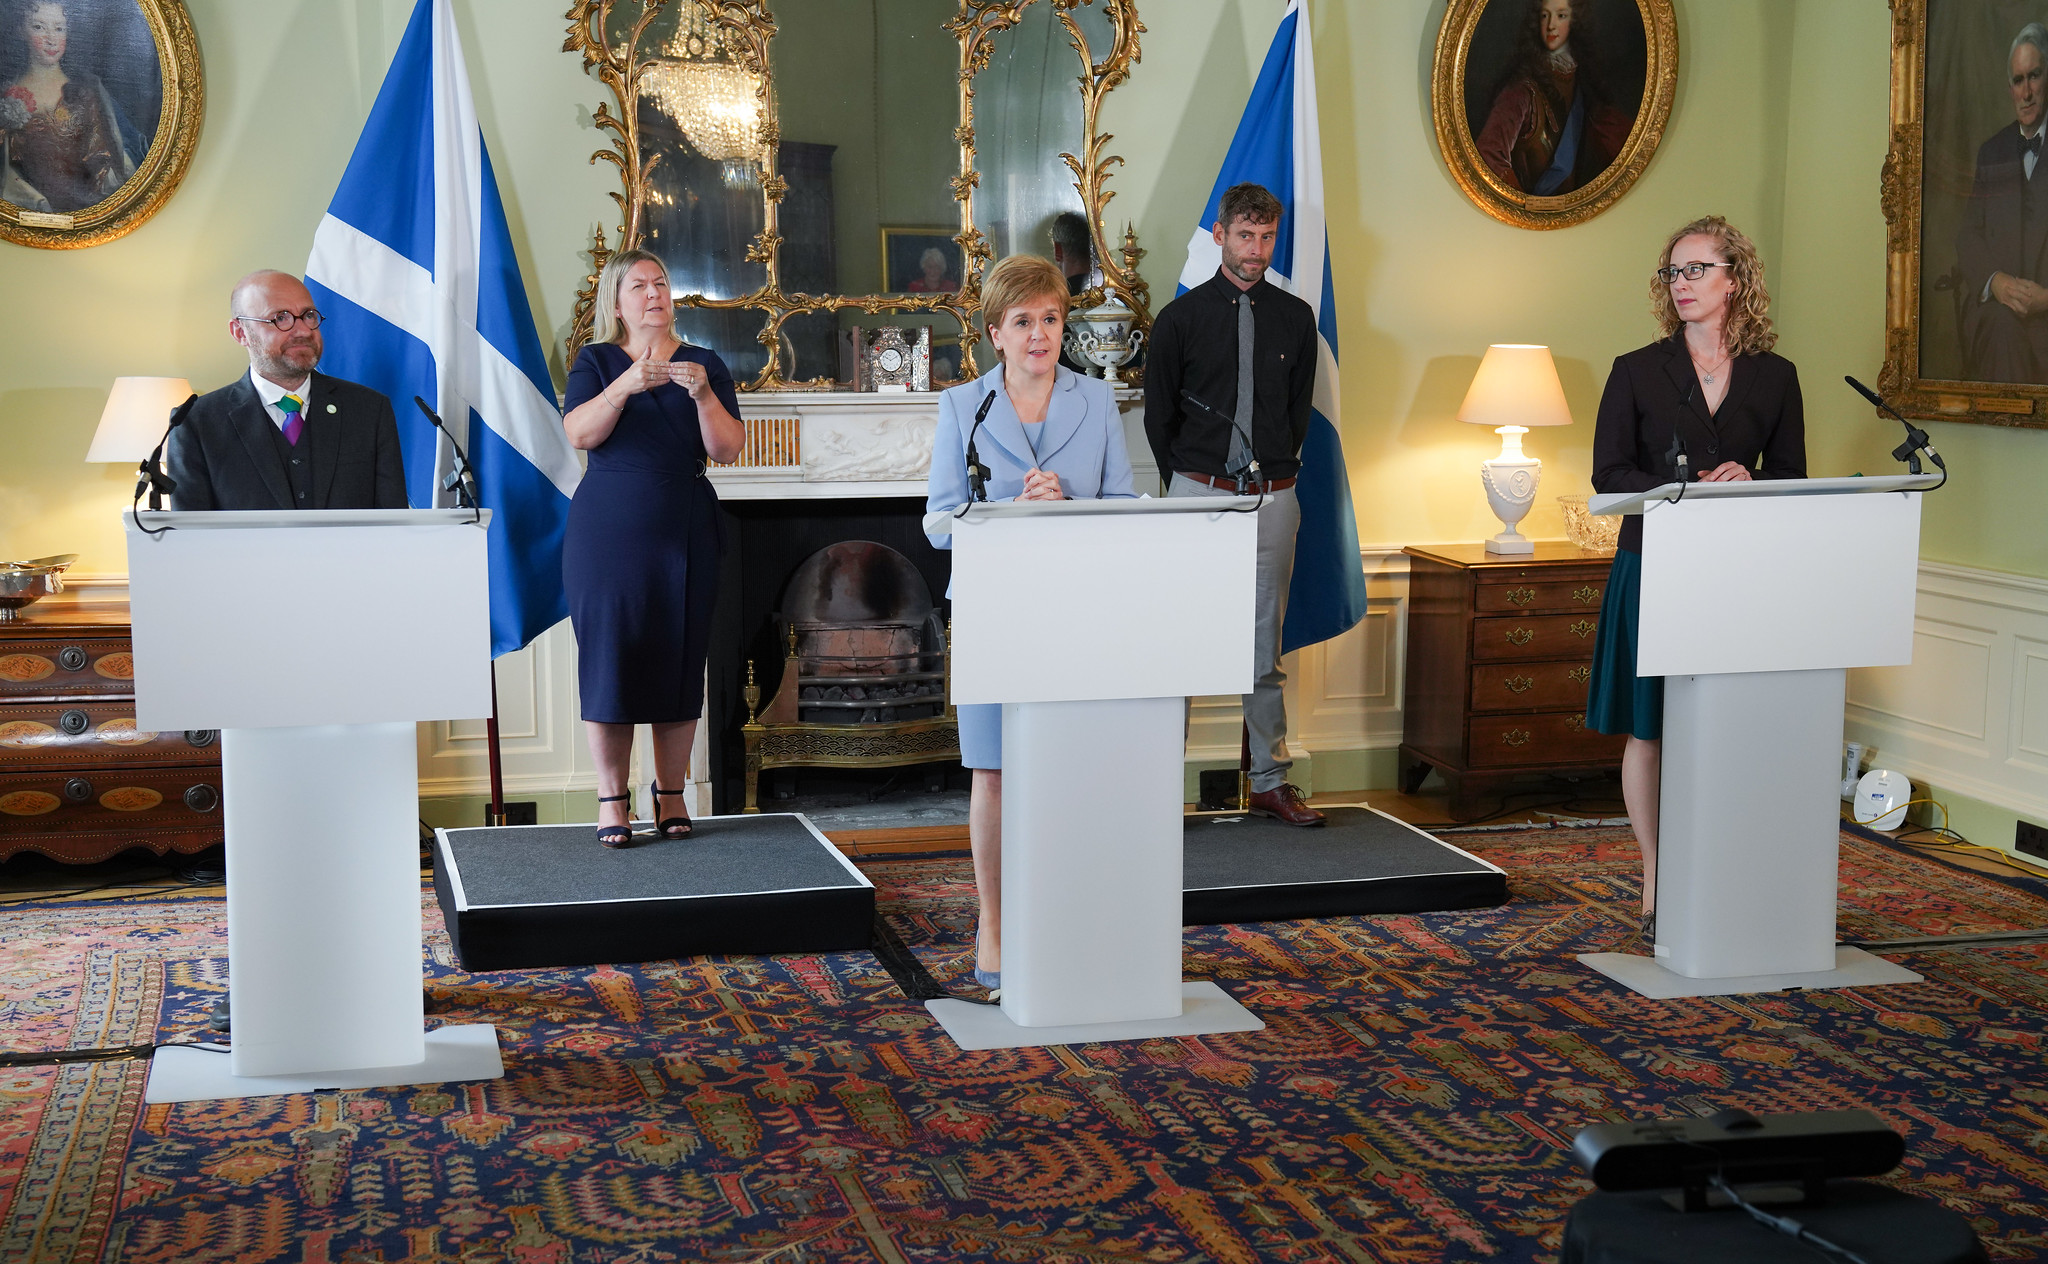 Patrick Harvie and Lorna Slater flank Nicola Sturgeon at a press conference in Bute House